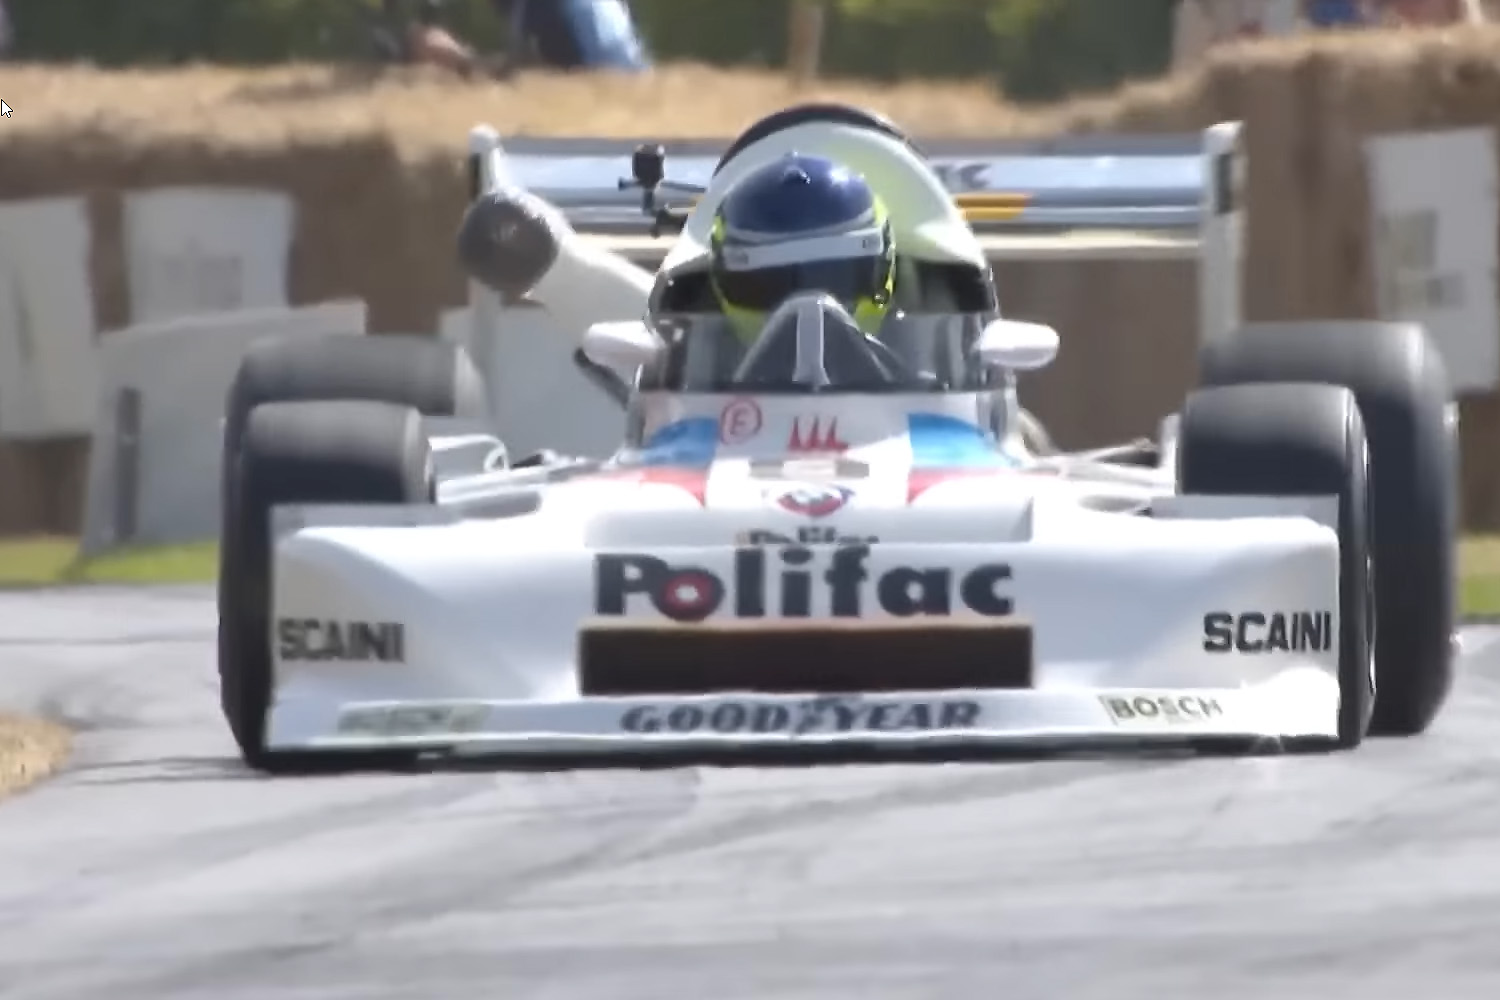 March 728 open wheel race car on track at Goodwood Festival of Speed